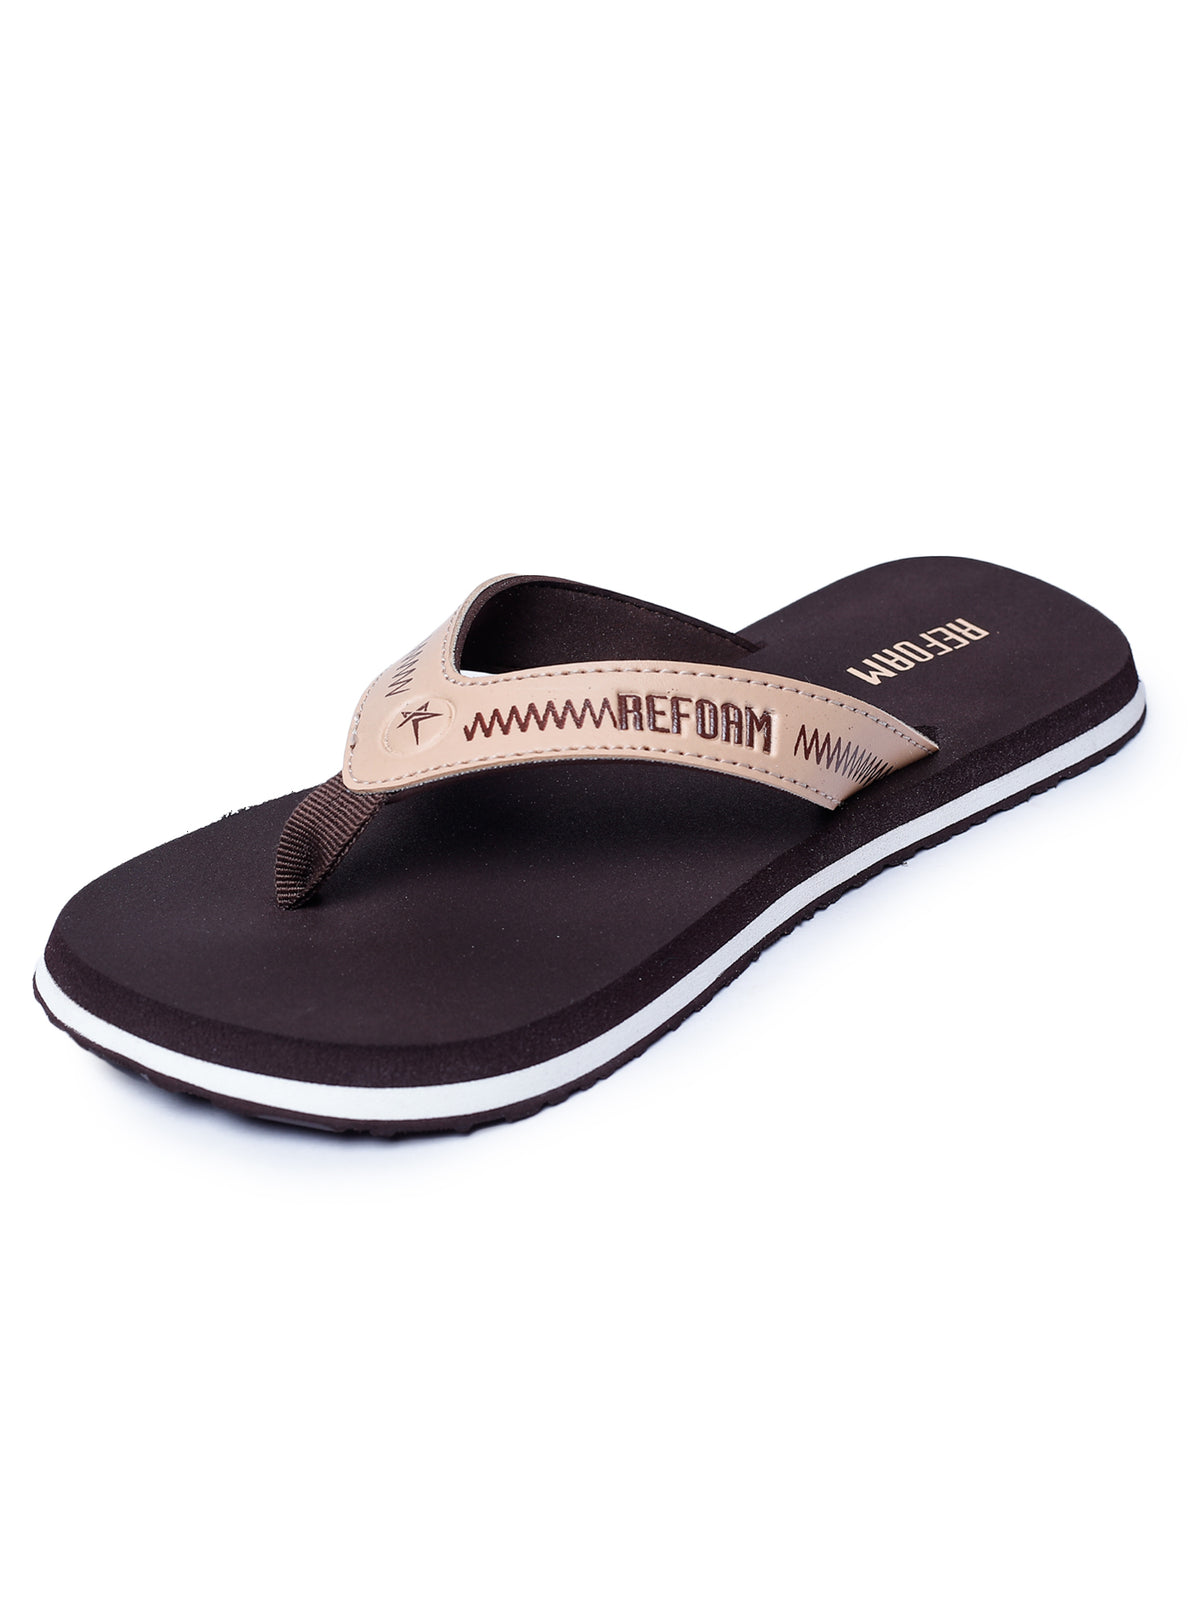 Brown Solid Rubber Slip On Casual Slippers For Women